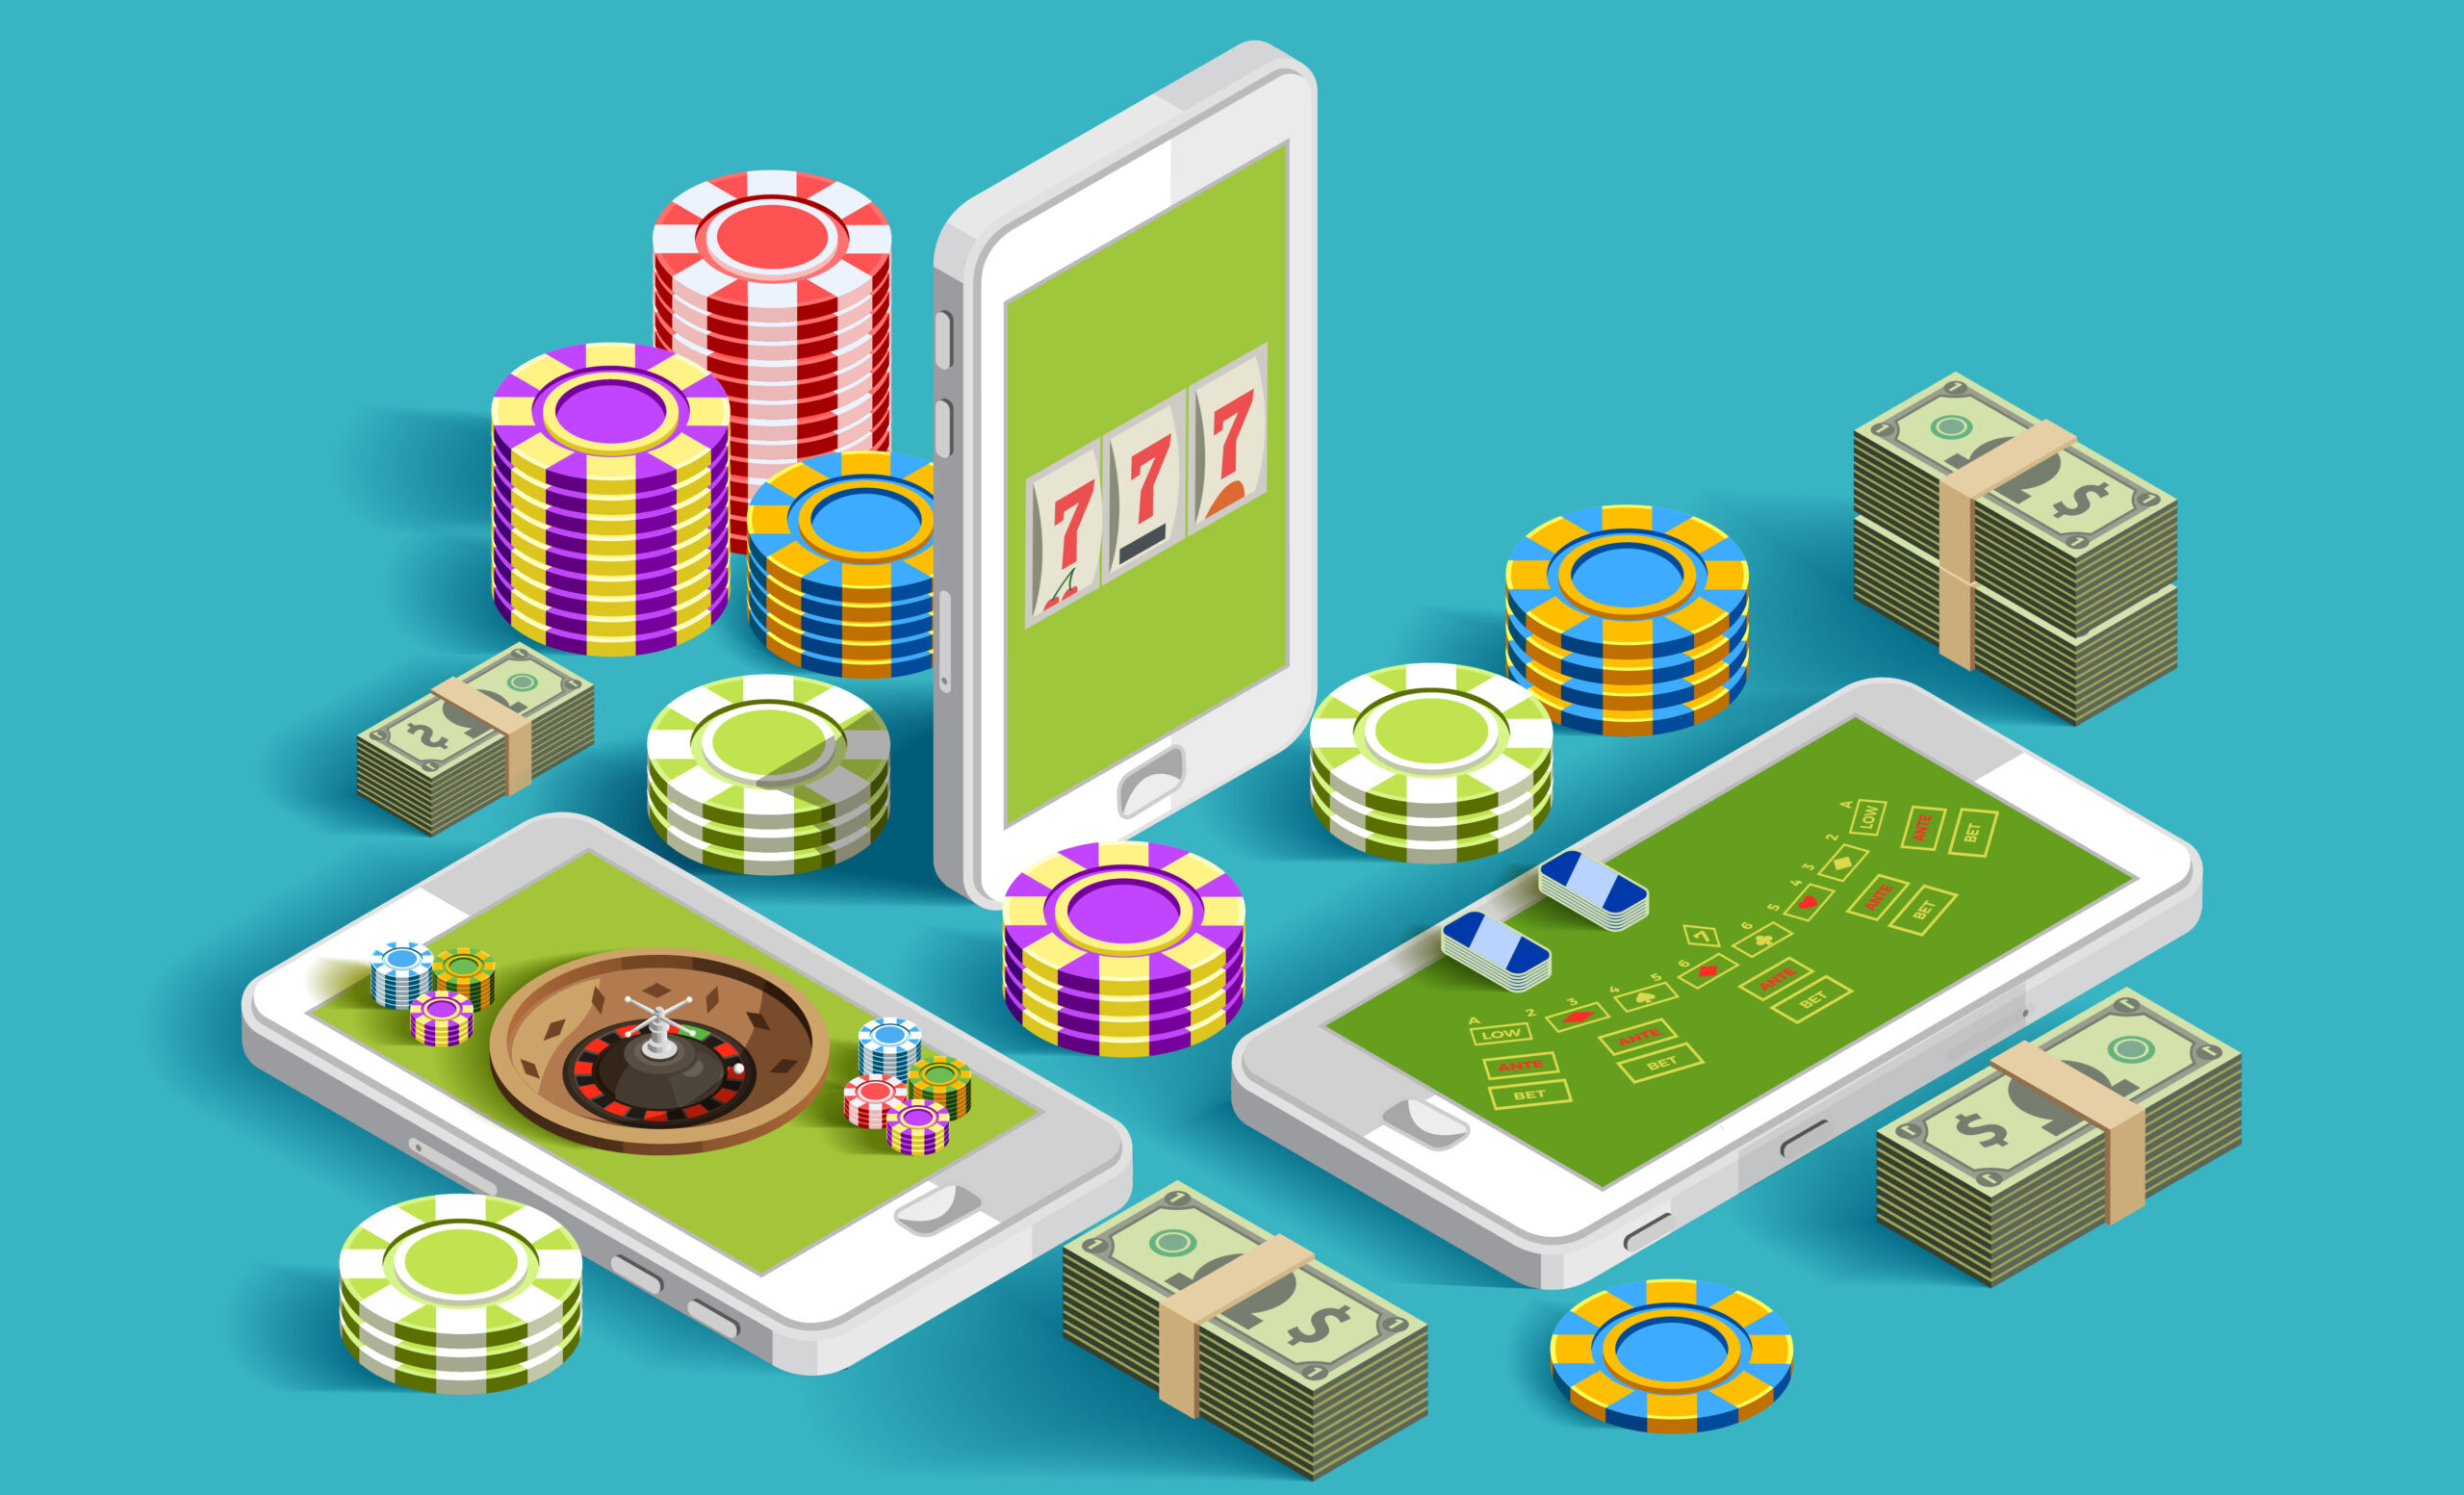 How to Download Casinos Apps from India